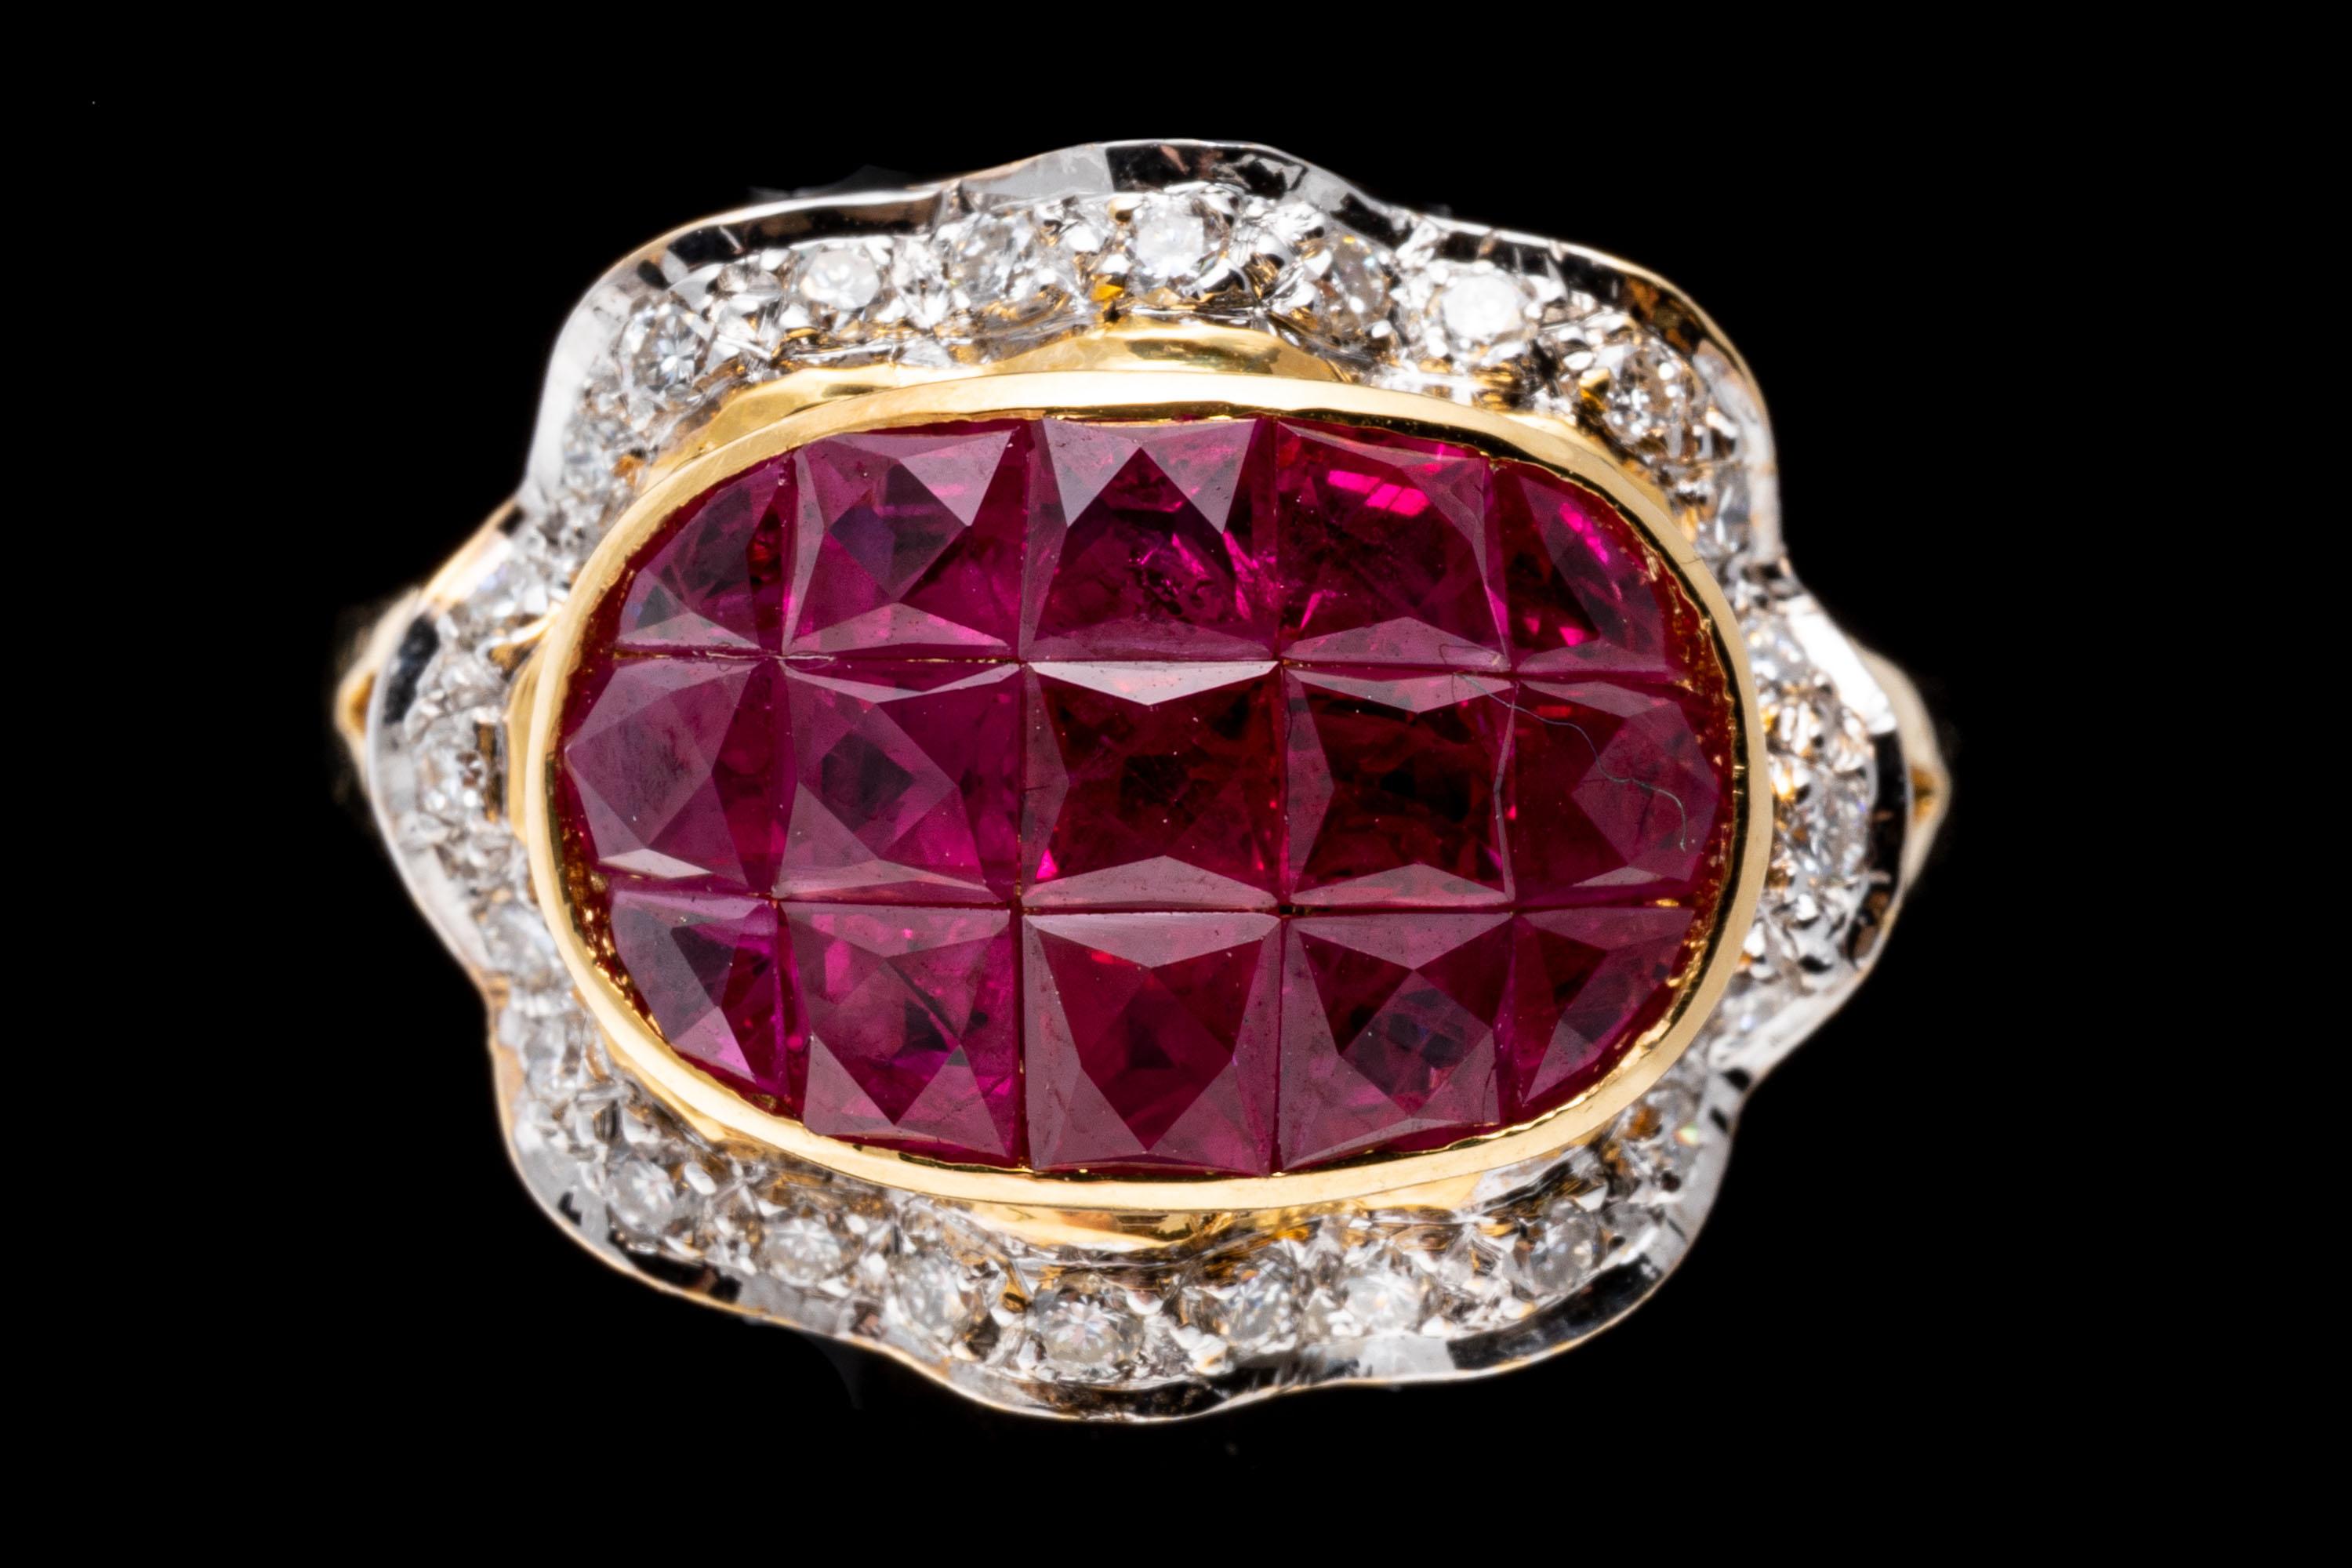 18k yellow gold ring. This pretty ring has an oval center made up of three rows of square calibre cut, medium pinkish red color rubies, approximately 1.95 TCW. Framing the rubies is a ruffled border, set with round faceted diamonds, approximately